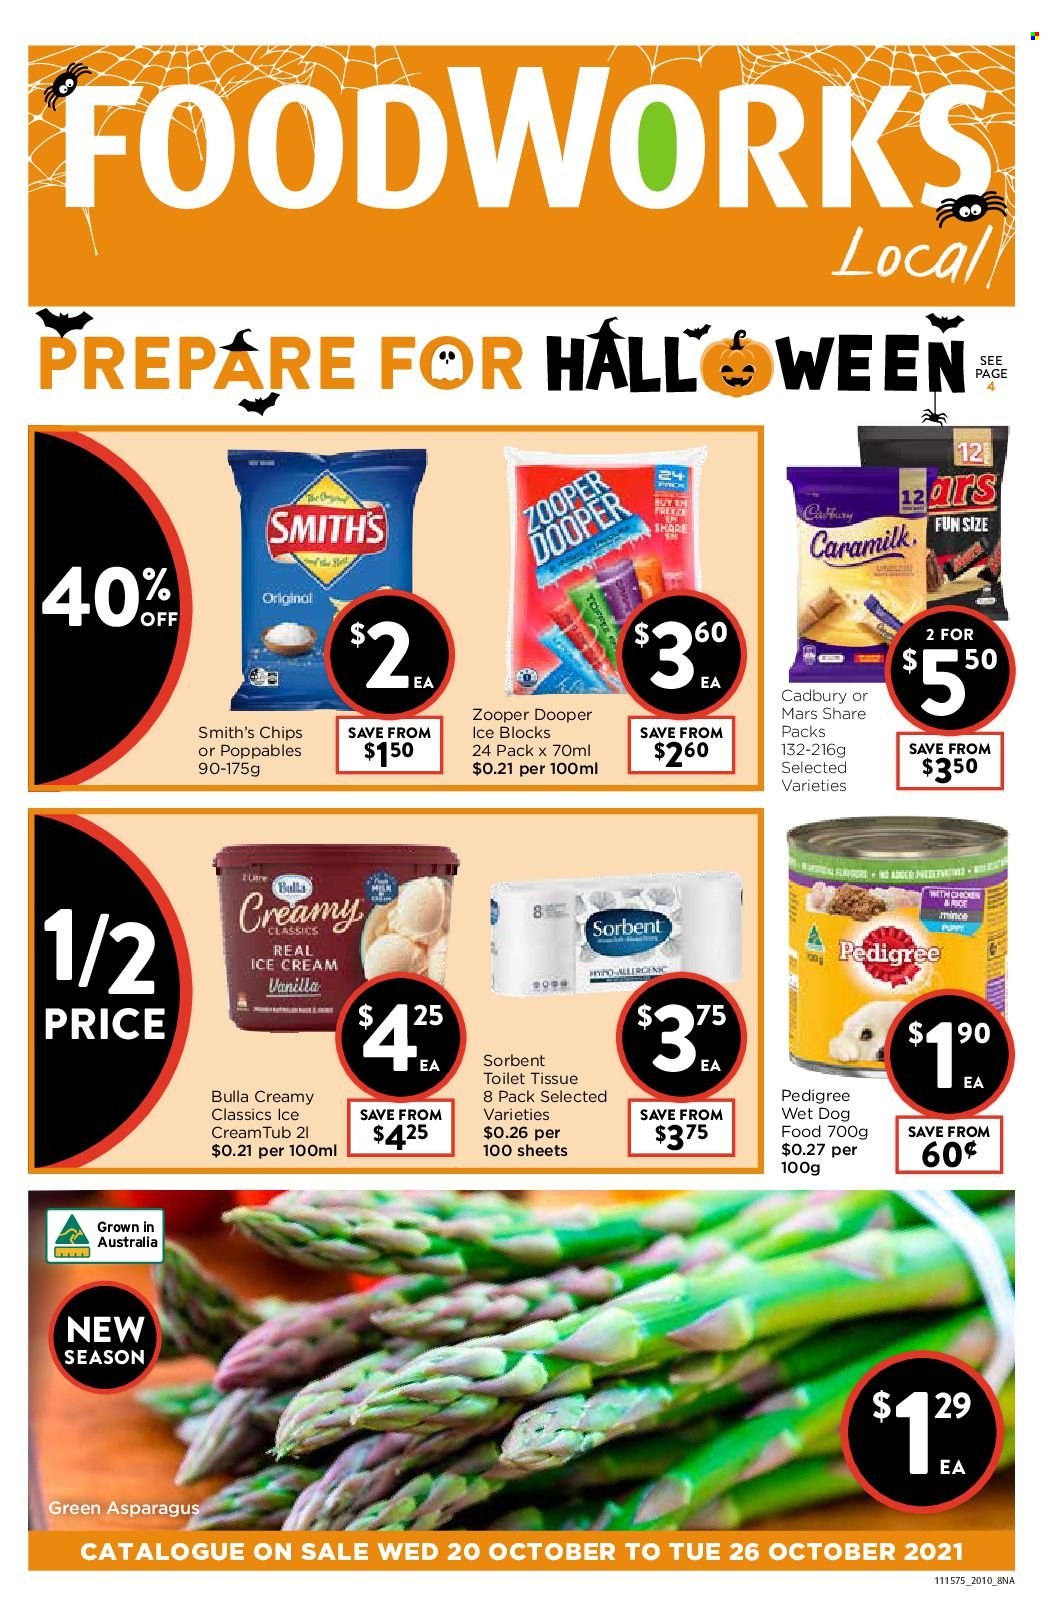 thumbnail - Foodworks Catalogue - 20 Oct 2021 - 26 Oct 2021 - Sales products - asparagus, ice cream, Mars, Zooper Dooper, Cadbury, chips, Smith's, toilet paper, animal food, dog food, wet dog food, Pedigree. Page 1.